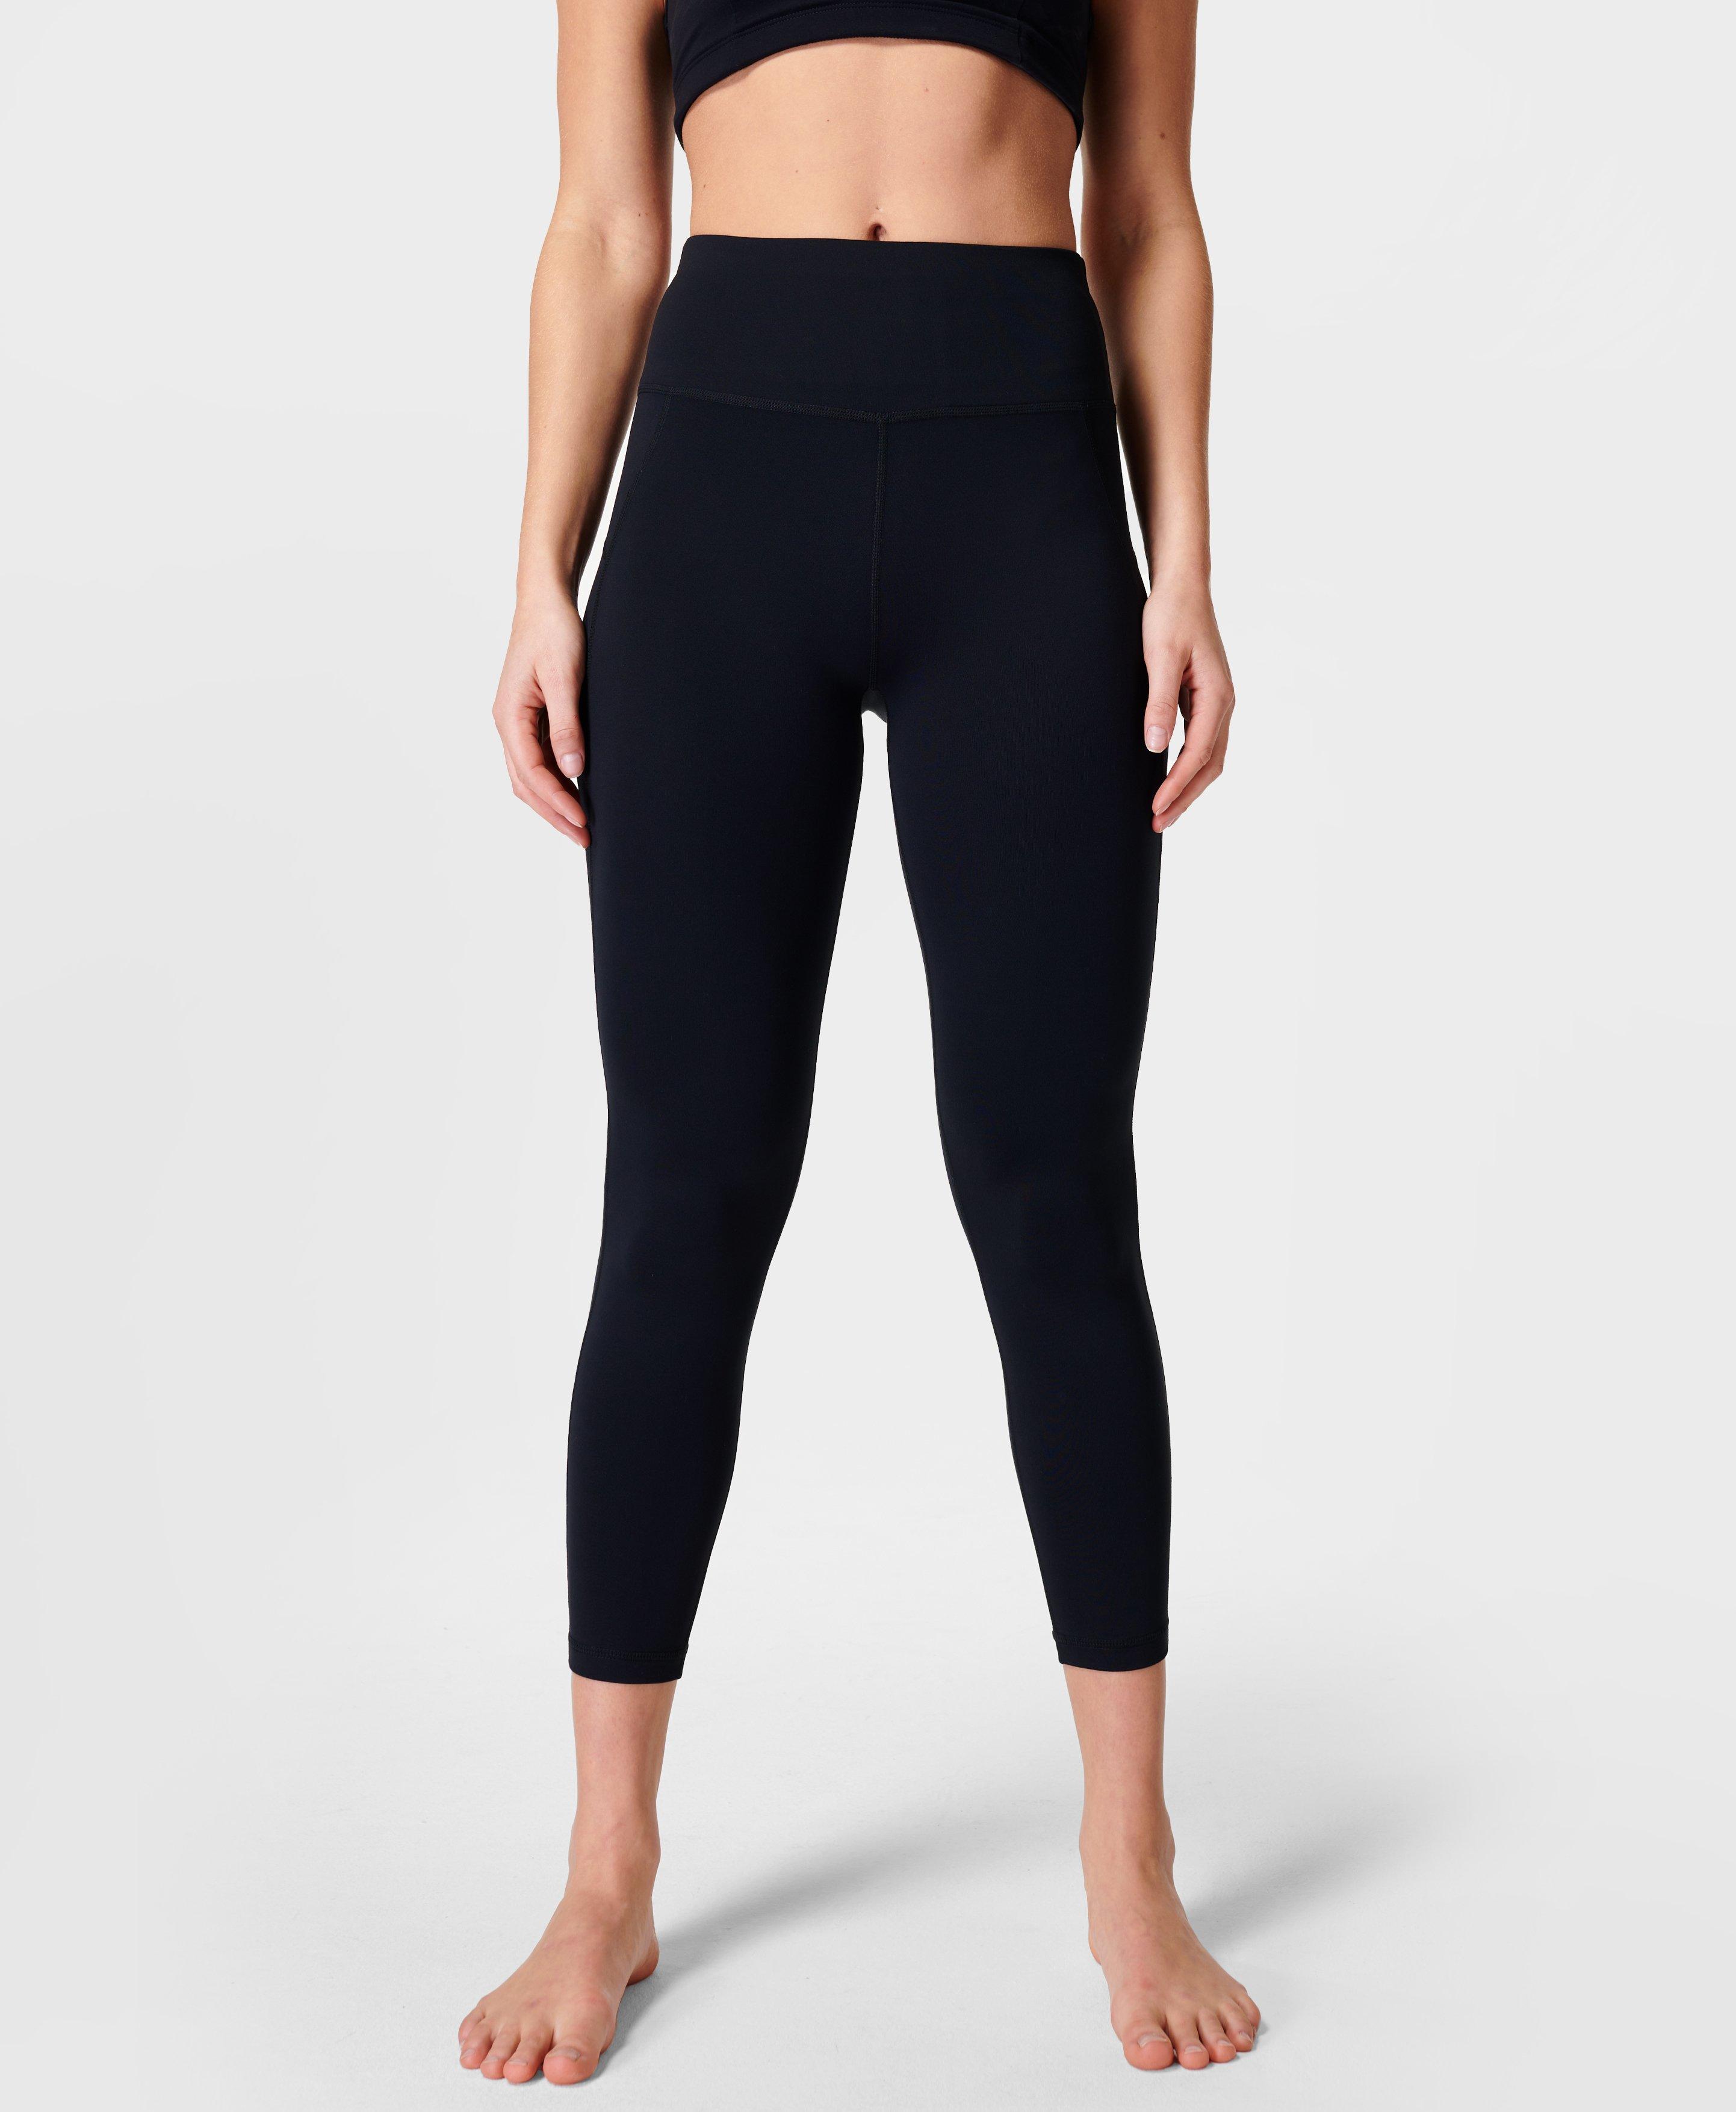 Sweaty Betty NEW All Day 7/8 Crop Length Rouche Hem Athletic Leggings Black  XL - $56 - From Galore